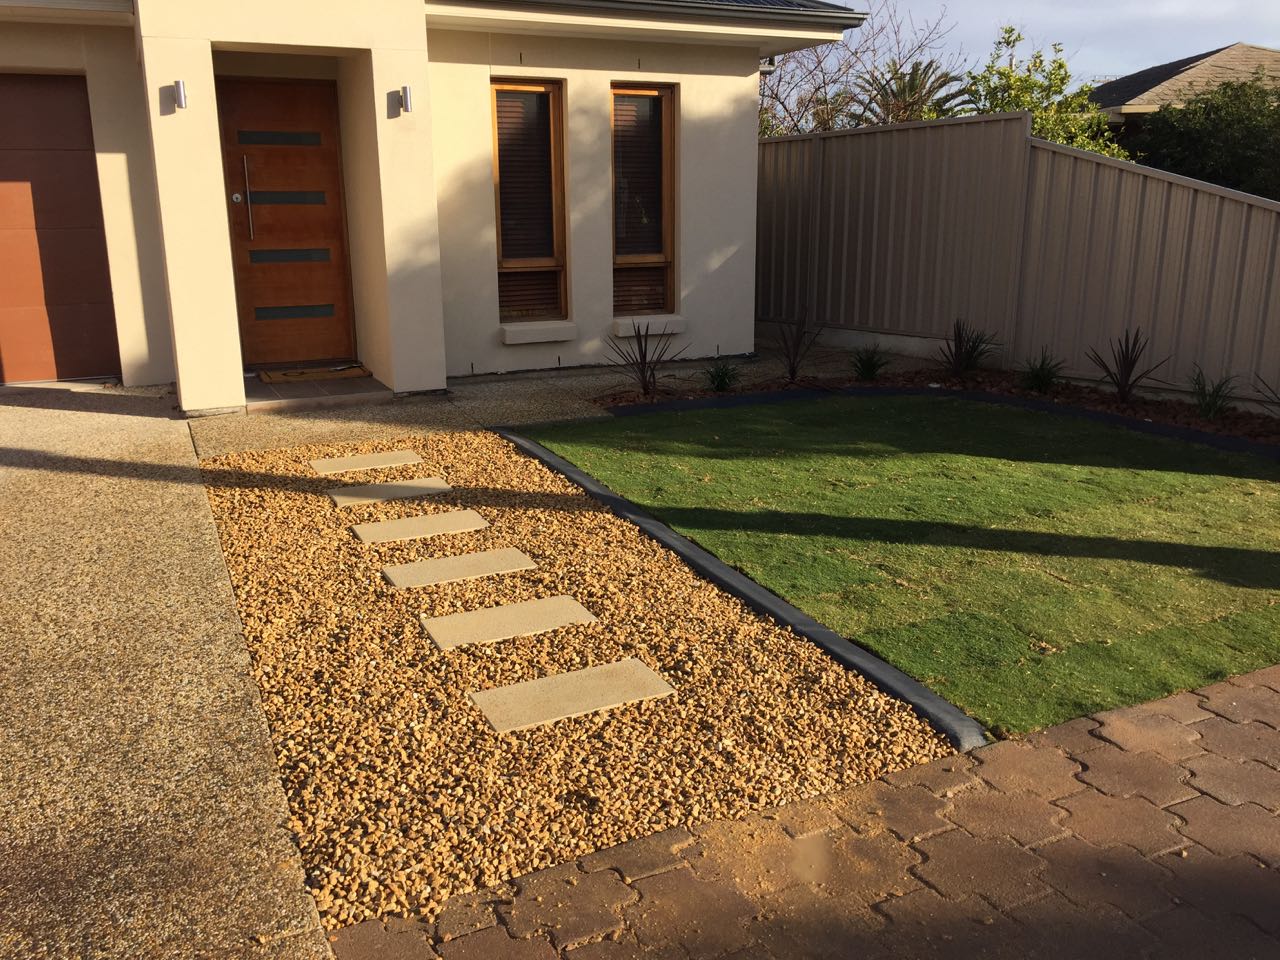 North Gate - Concrete Tiled Pathway Adding To Front Lawn's Charm